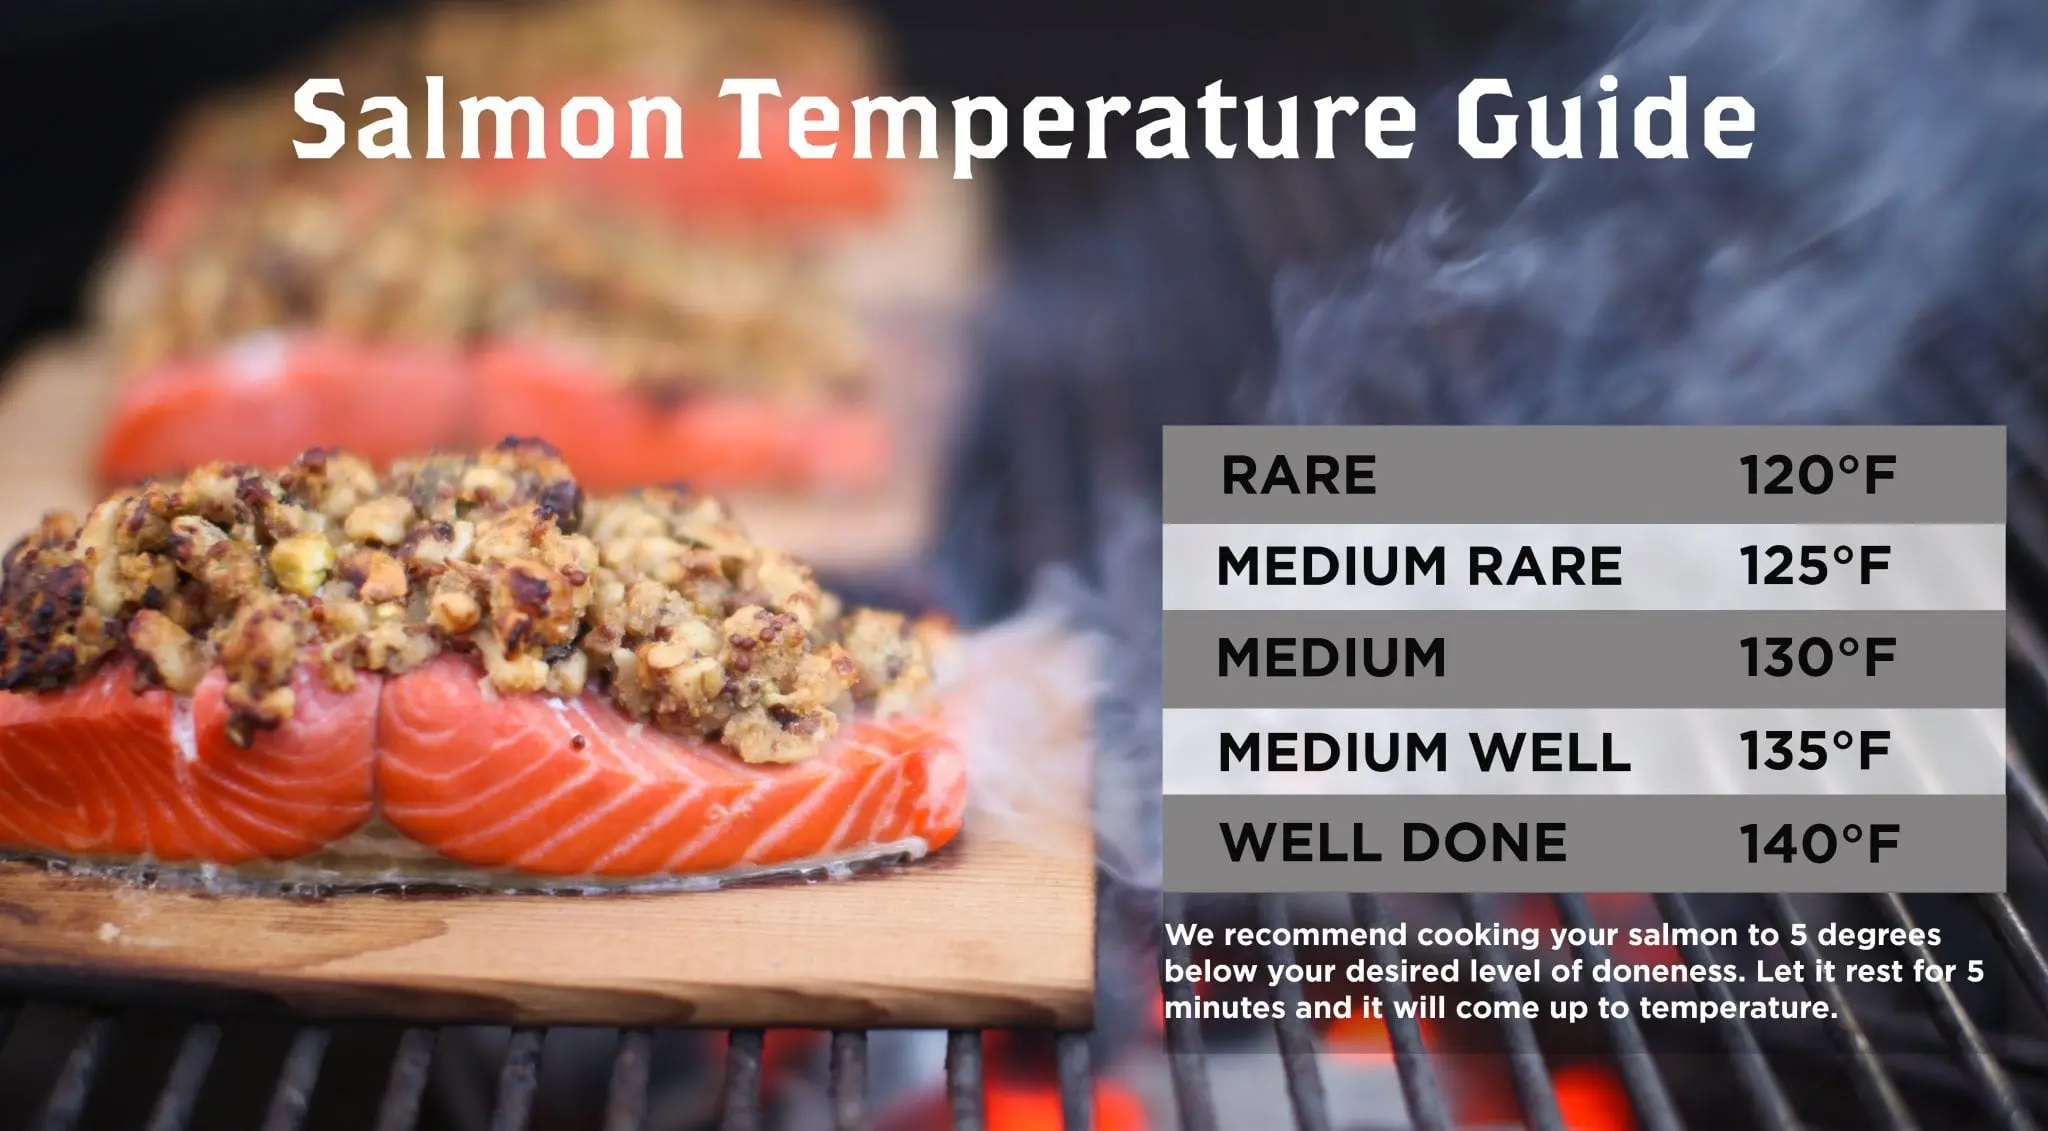 smoked salmon cook temp - Can you eat smoked salmon at 130 degrees